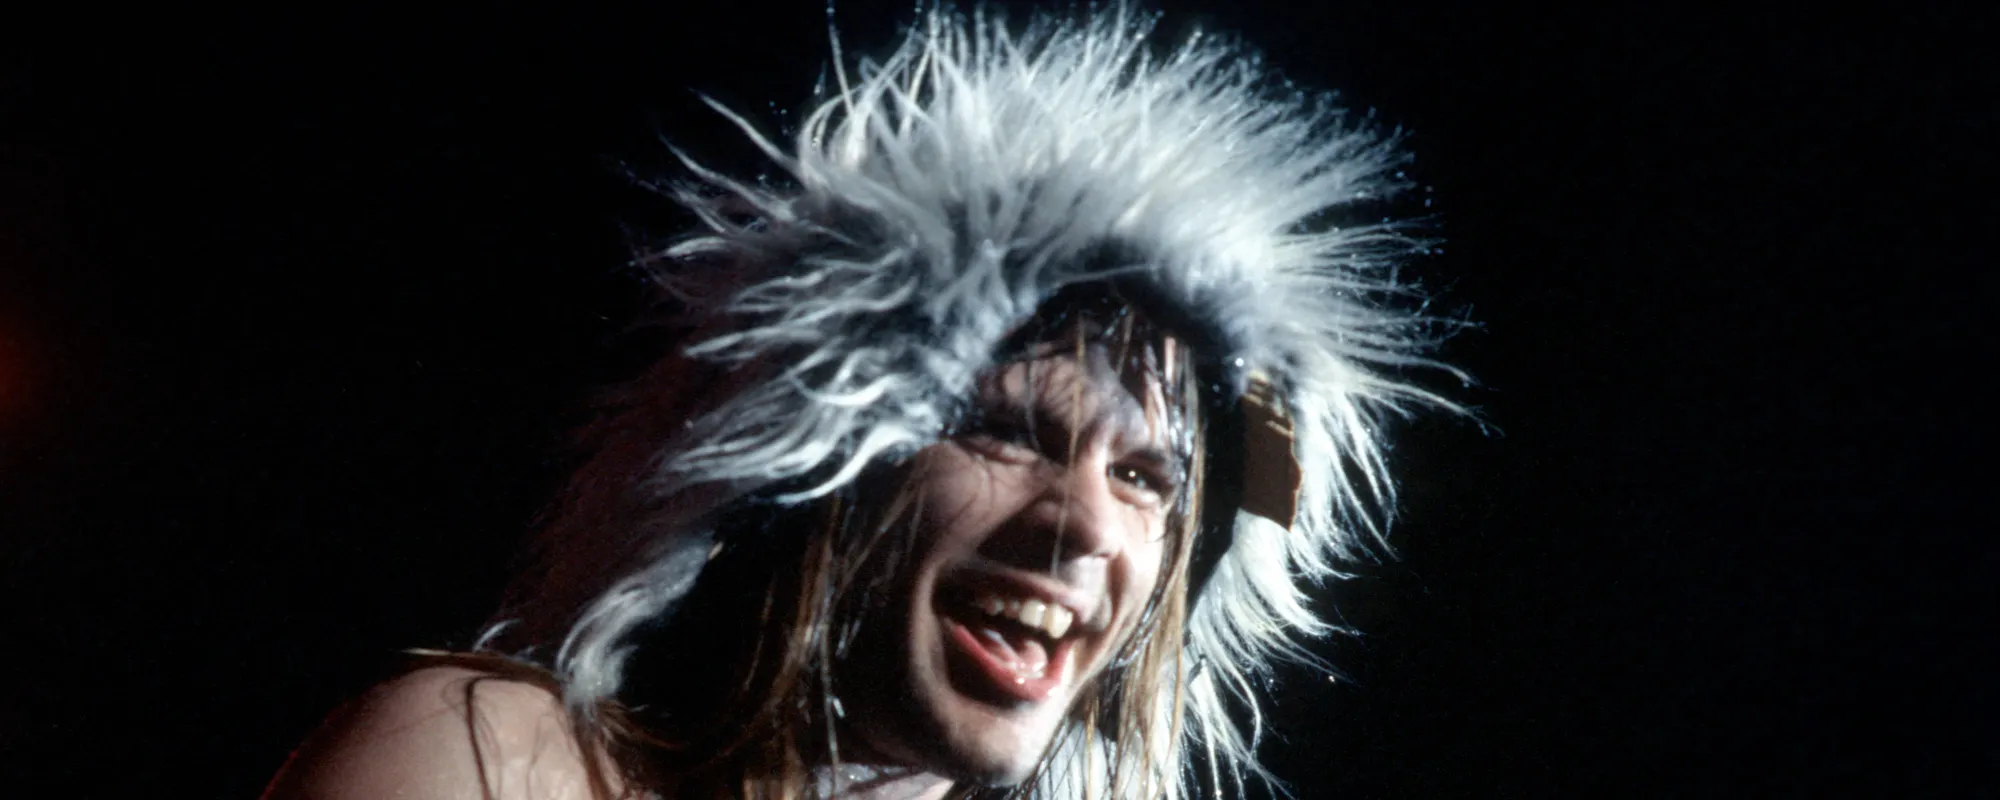 The Self-Destructive Madness that Inspired “2 Minutes to Midnight” by Iron Maiden